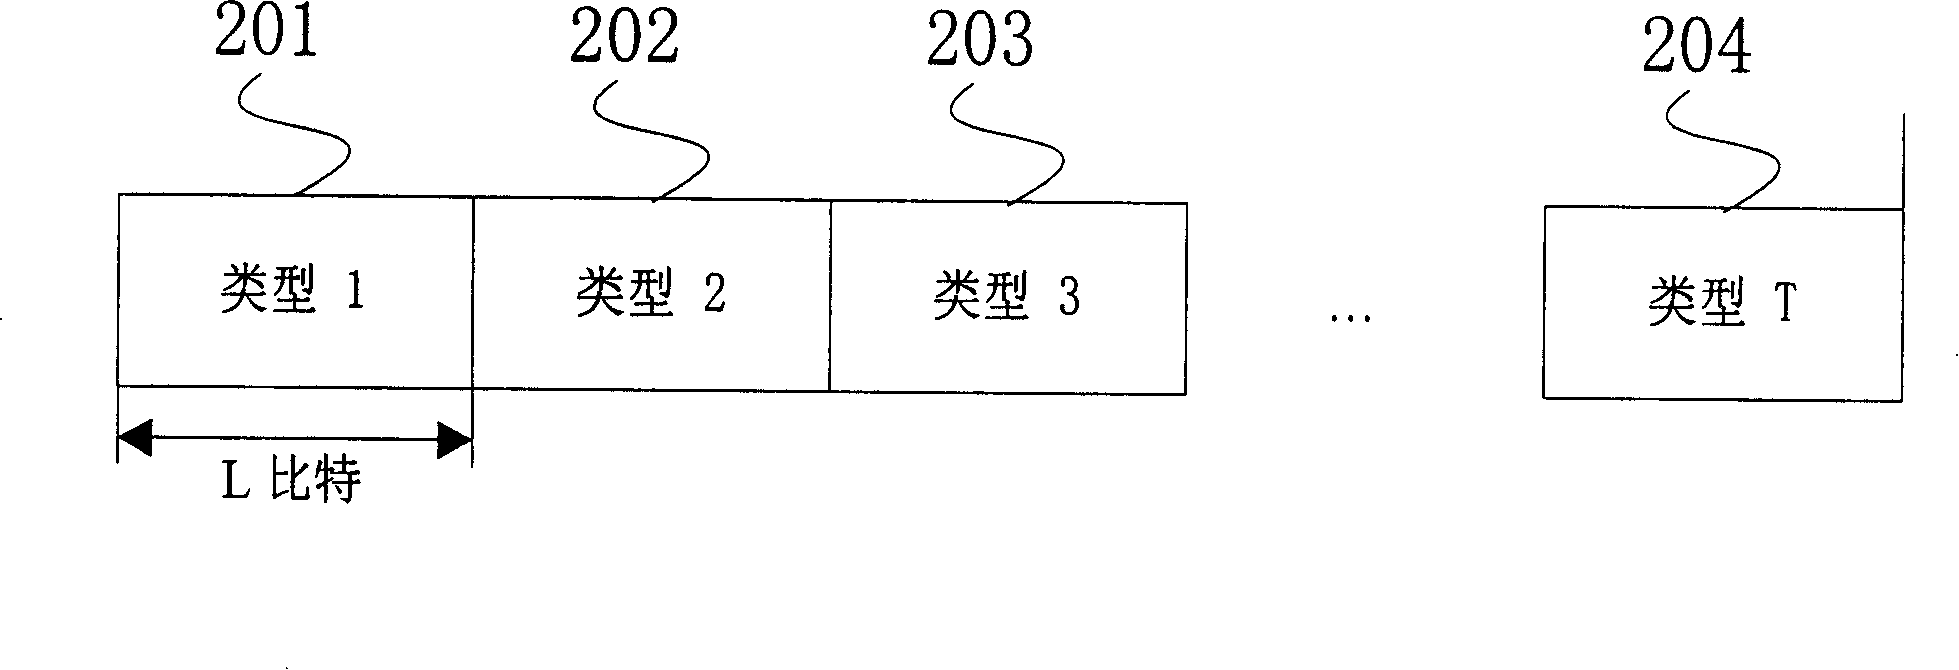 Transmission device and method for downlink control signaling in wireless communication system